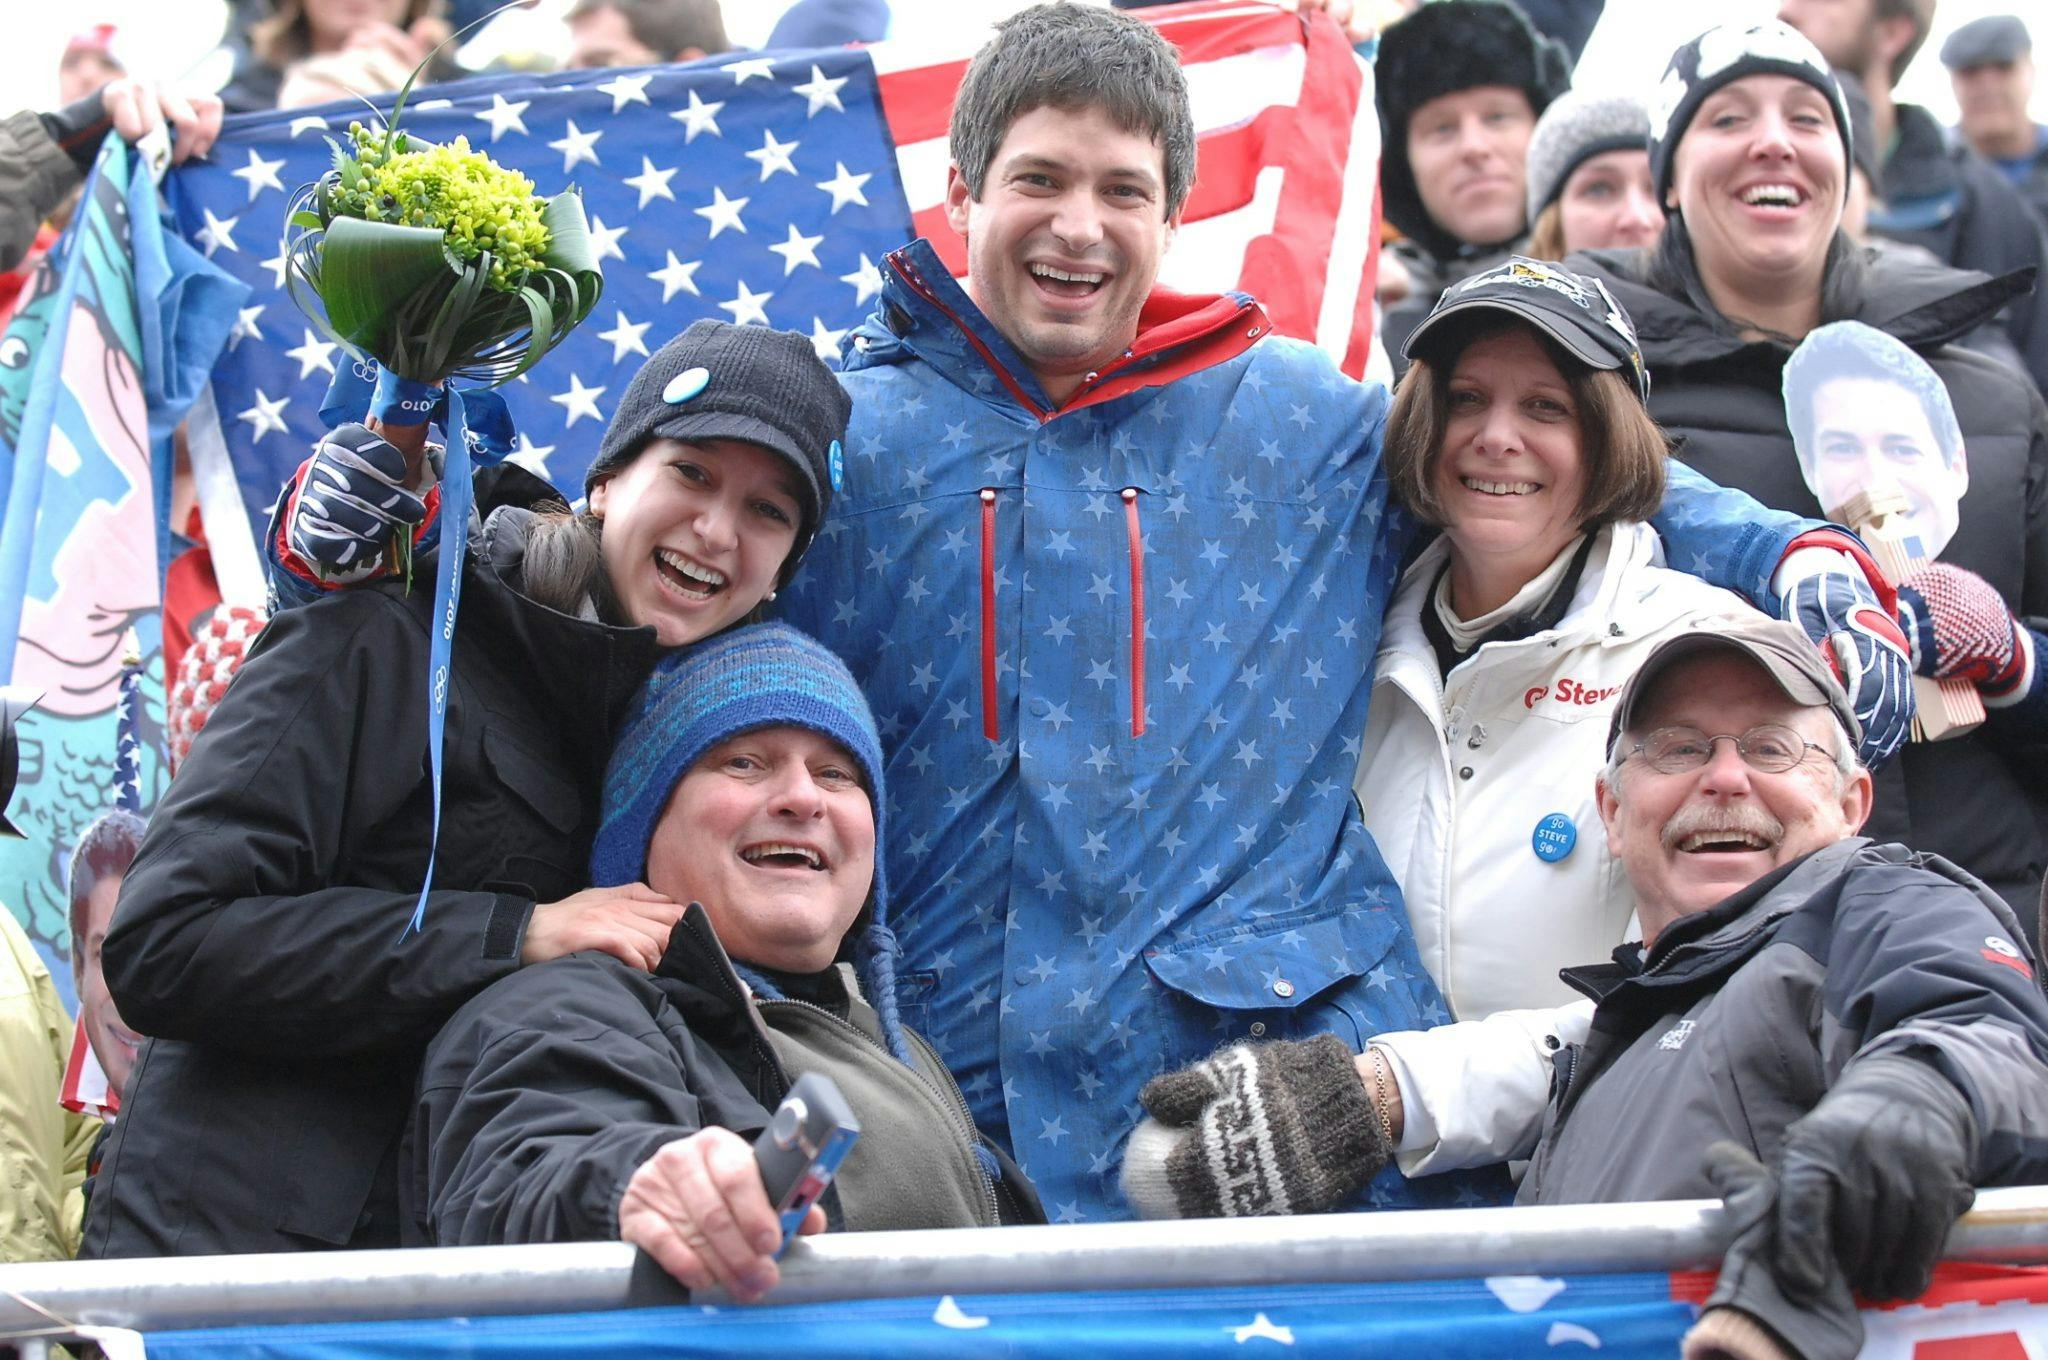 Steve Mesler wins Olympics gold medal at 2010 Vancouver Olympics Games in Bobsled